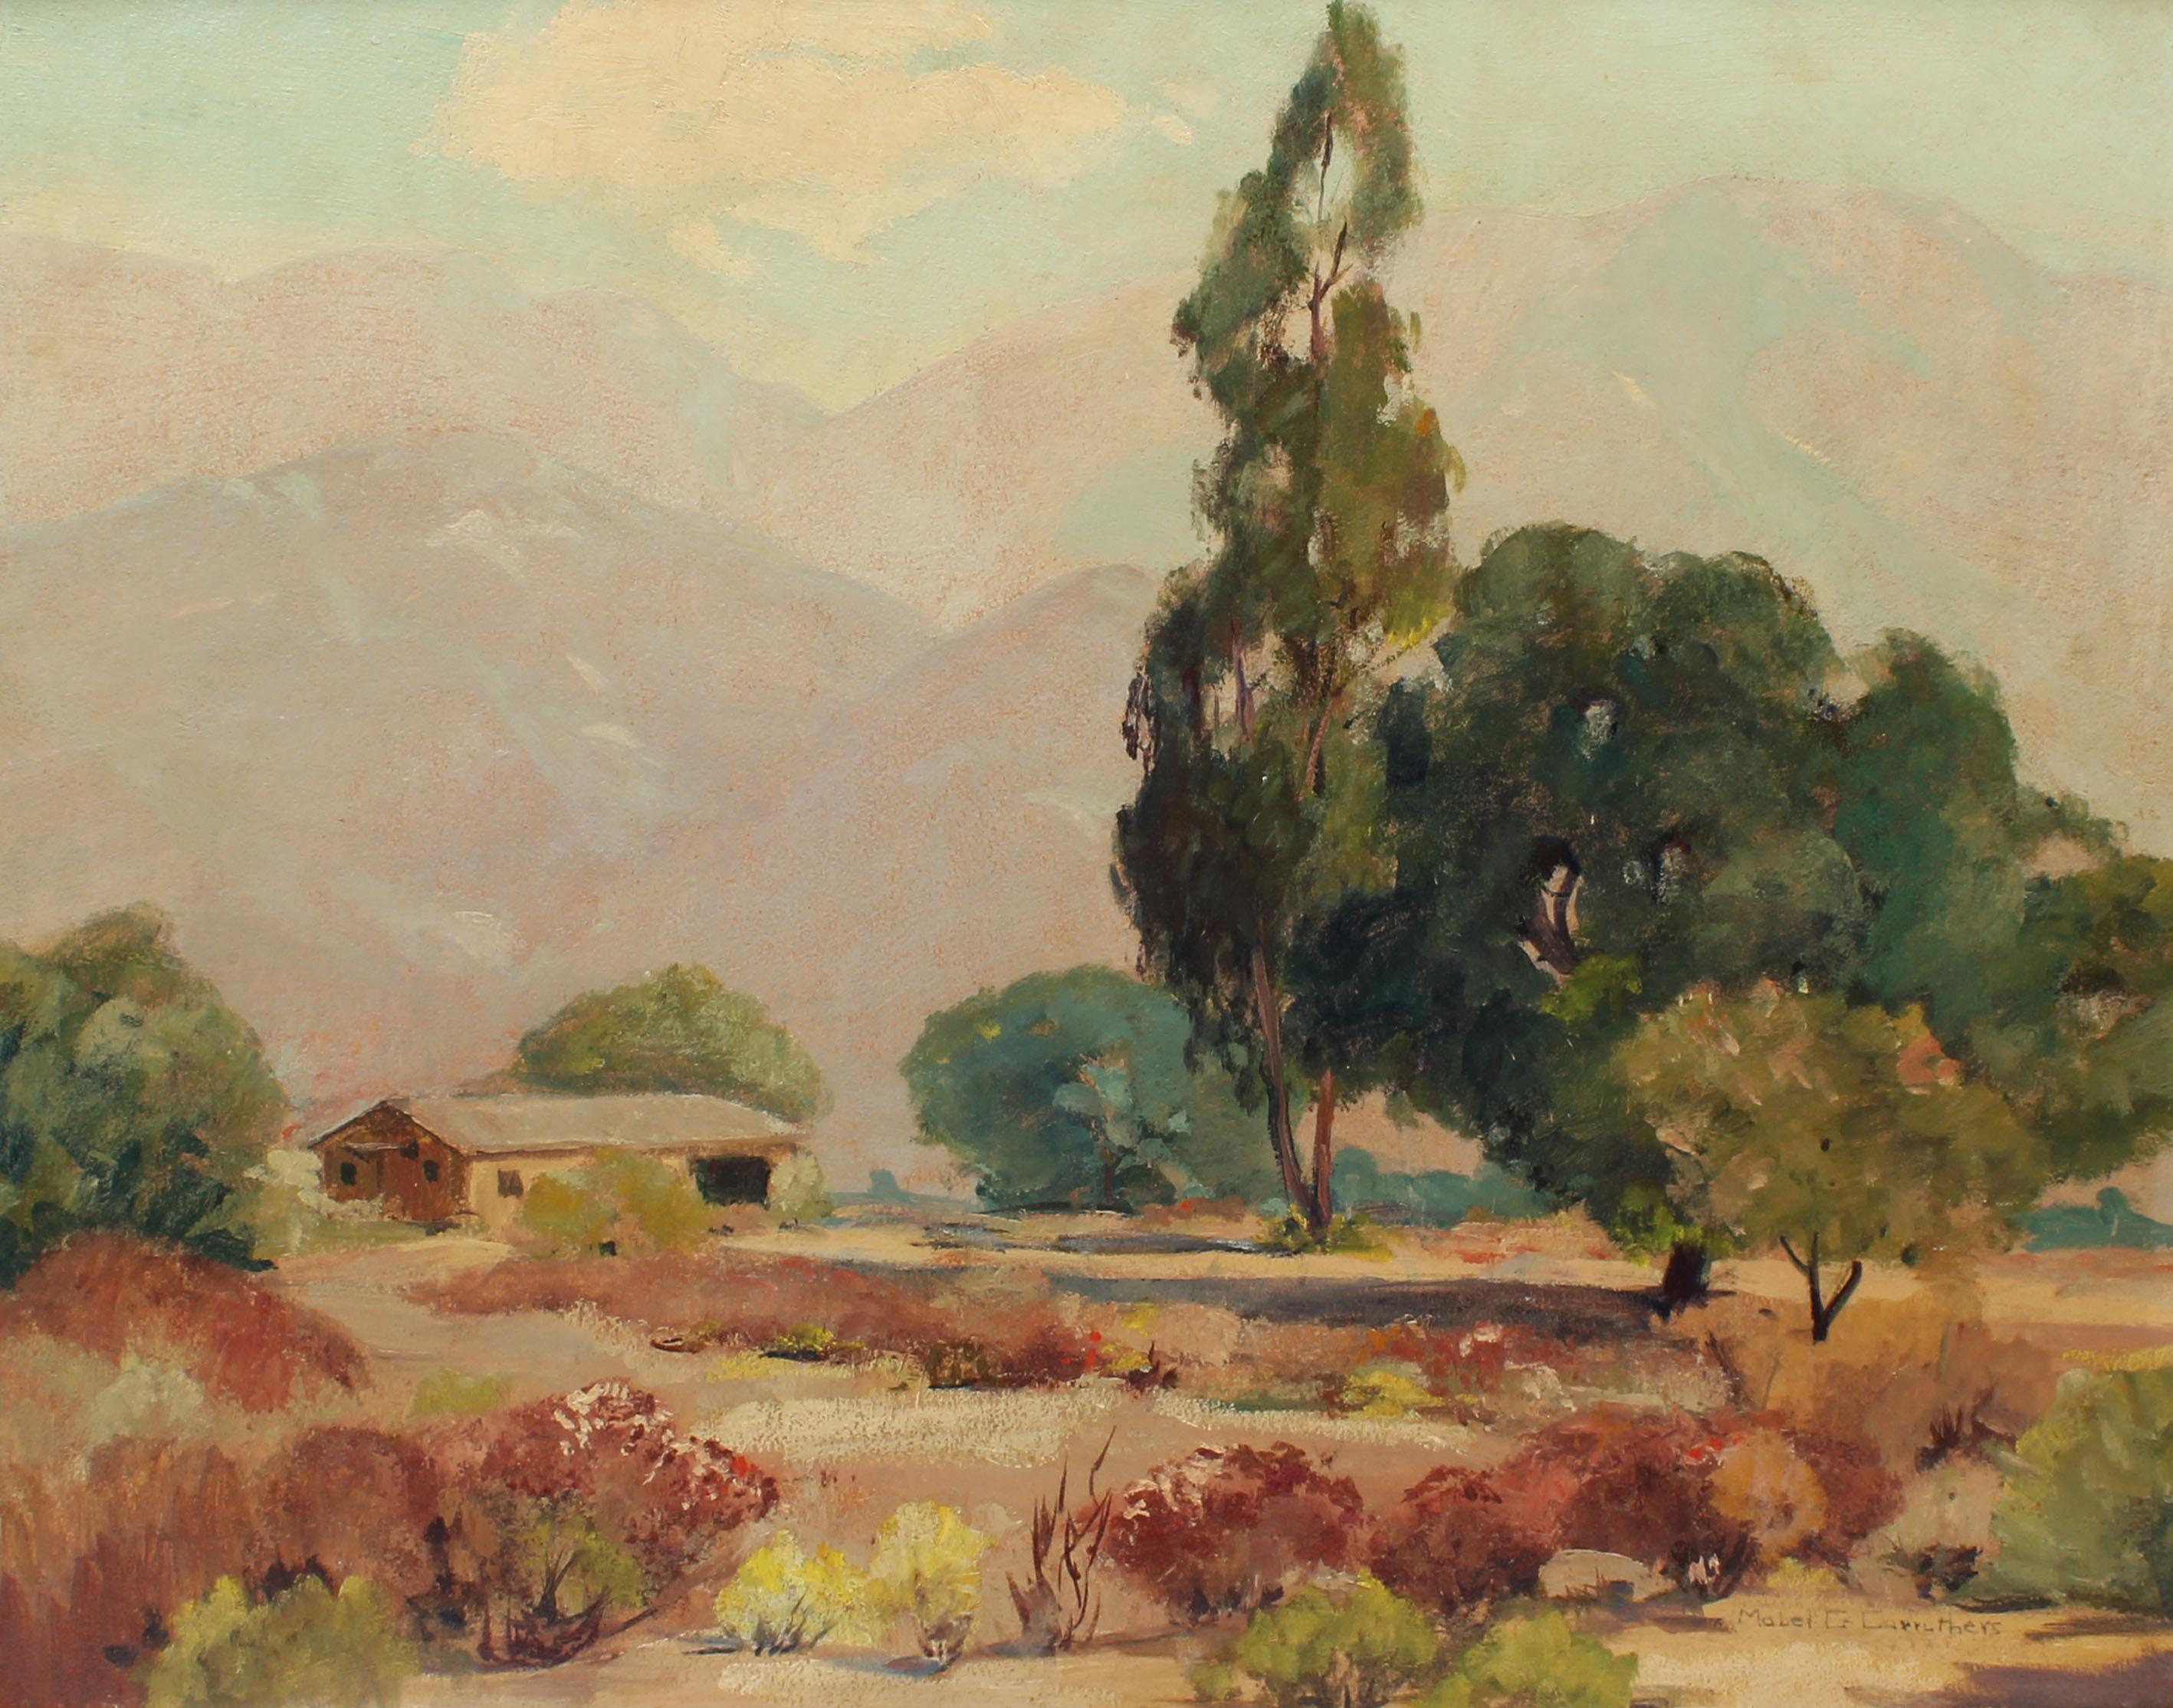 Antique American Original California Mountain Valley Landscape Oil Painting - Brown Landscape Painting by Unknown